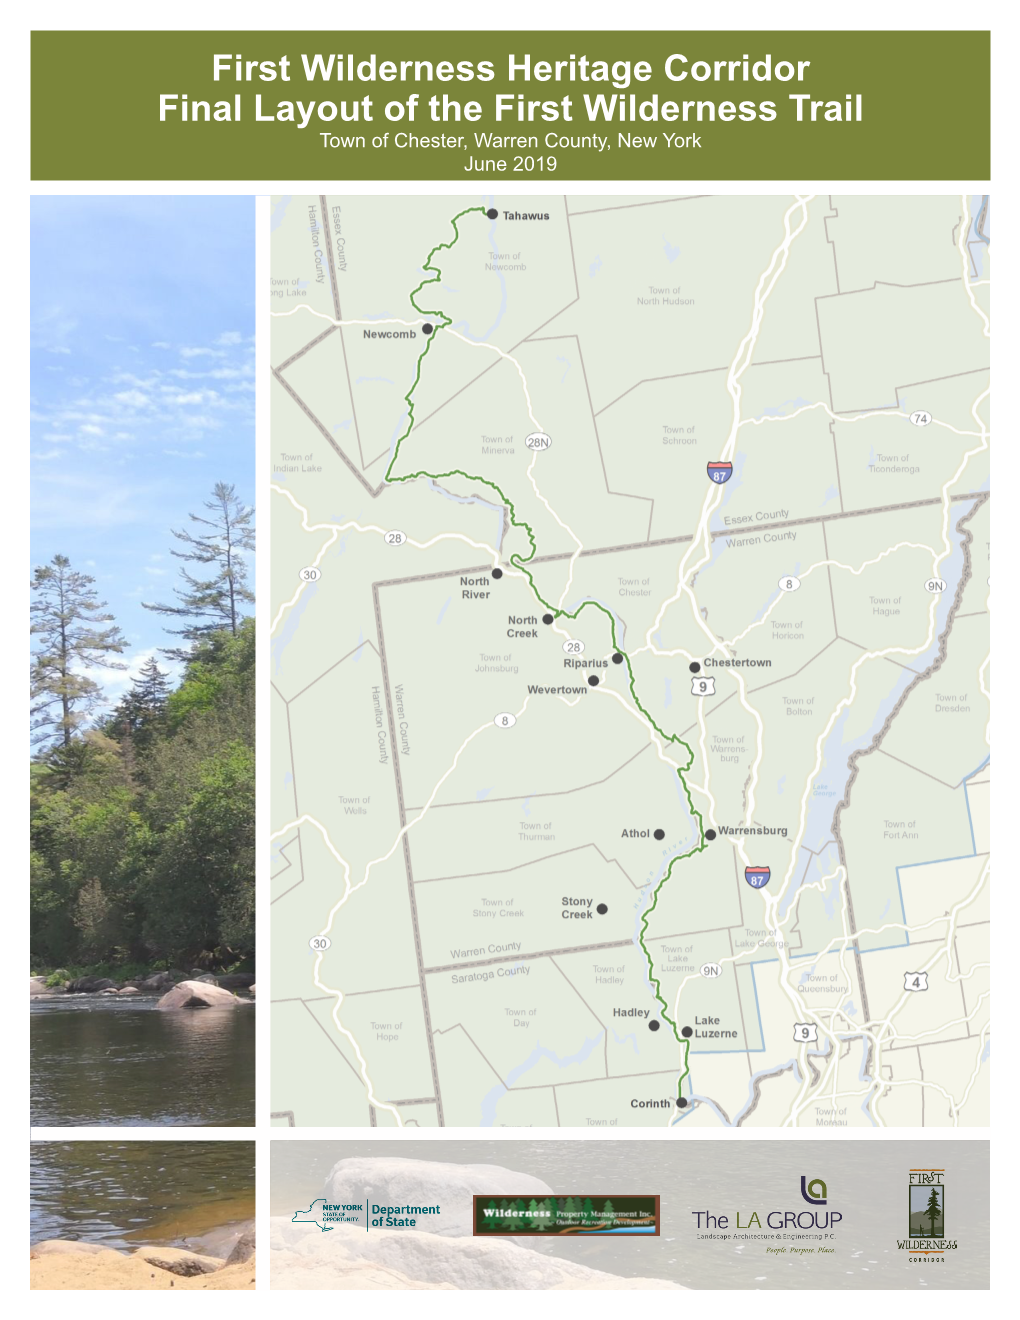 First Wilderness Heritage Corridor Final Layout of the First Wilderness Trail Town of Chester, Warren County, New York June 2019